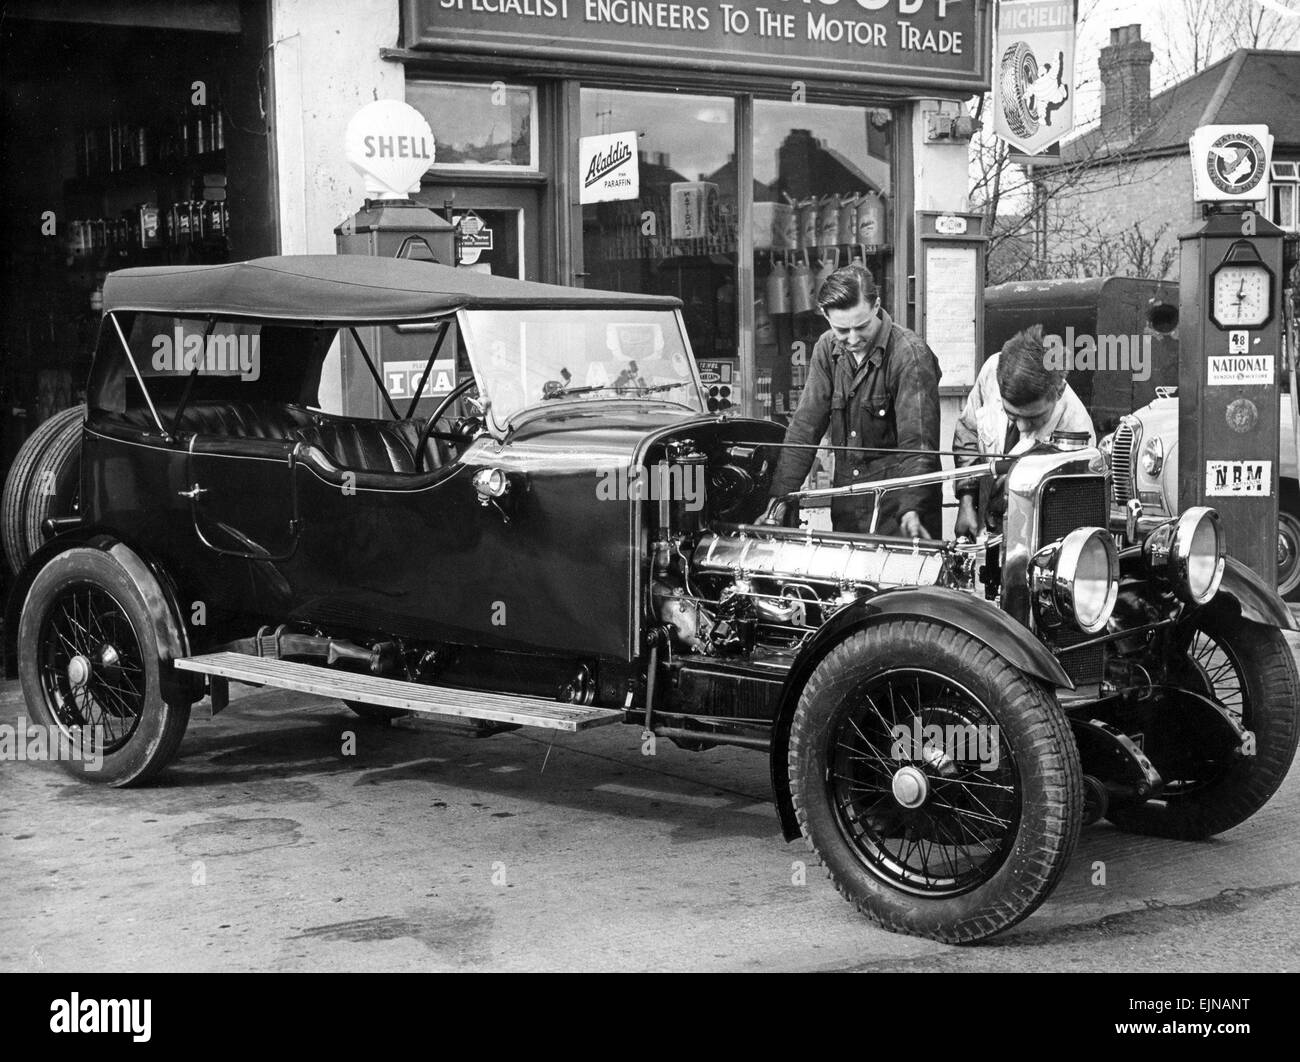 This 1927 Sunbeam 3 Ltr.Super Sports Tourer car outside the Rugby garage where it is being restored. 27th March 1957 Stock Photo